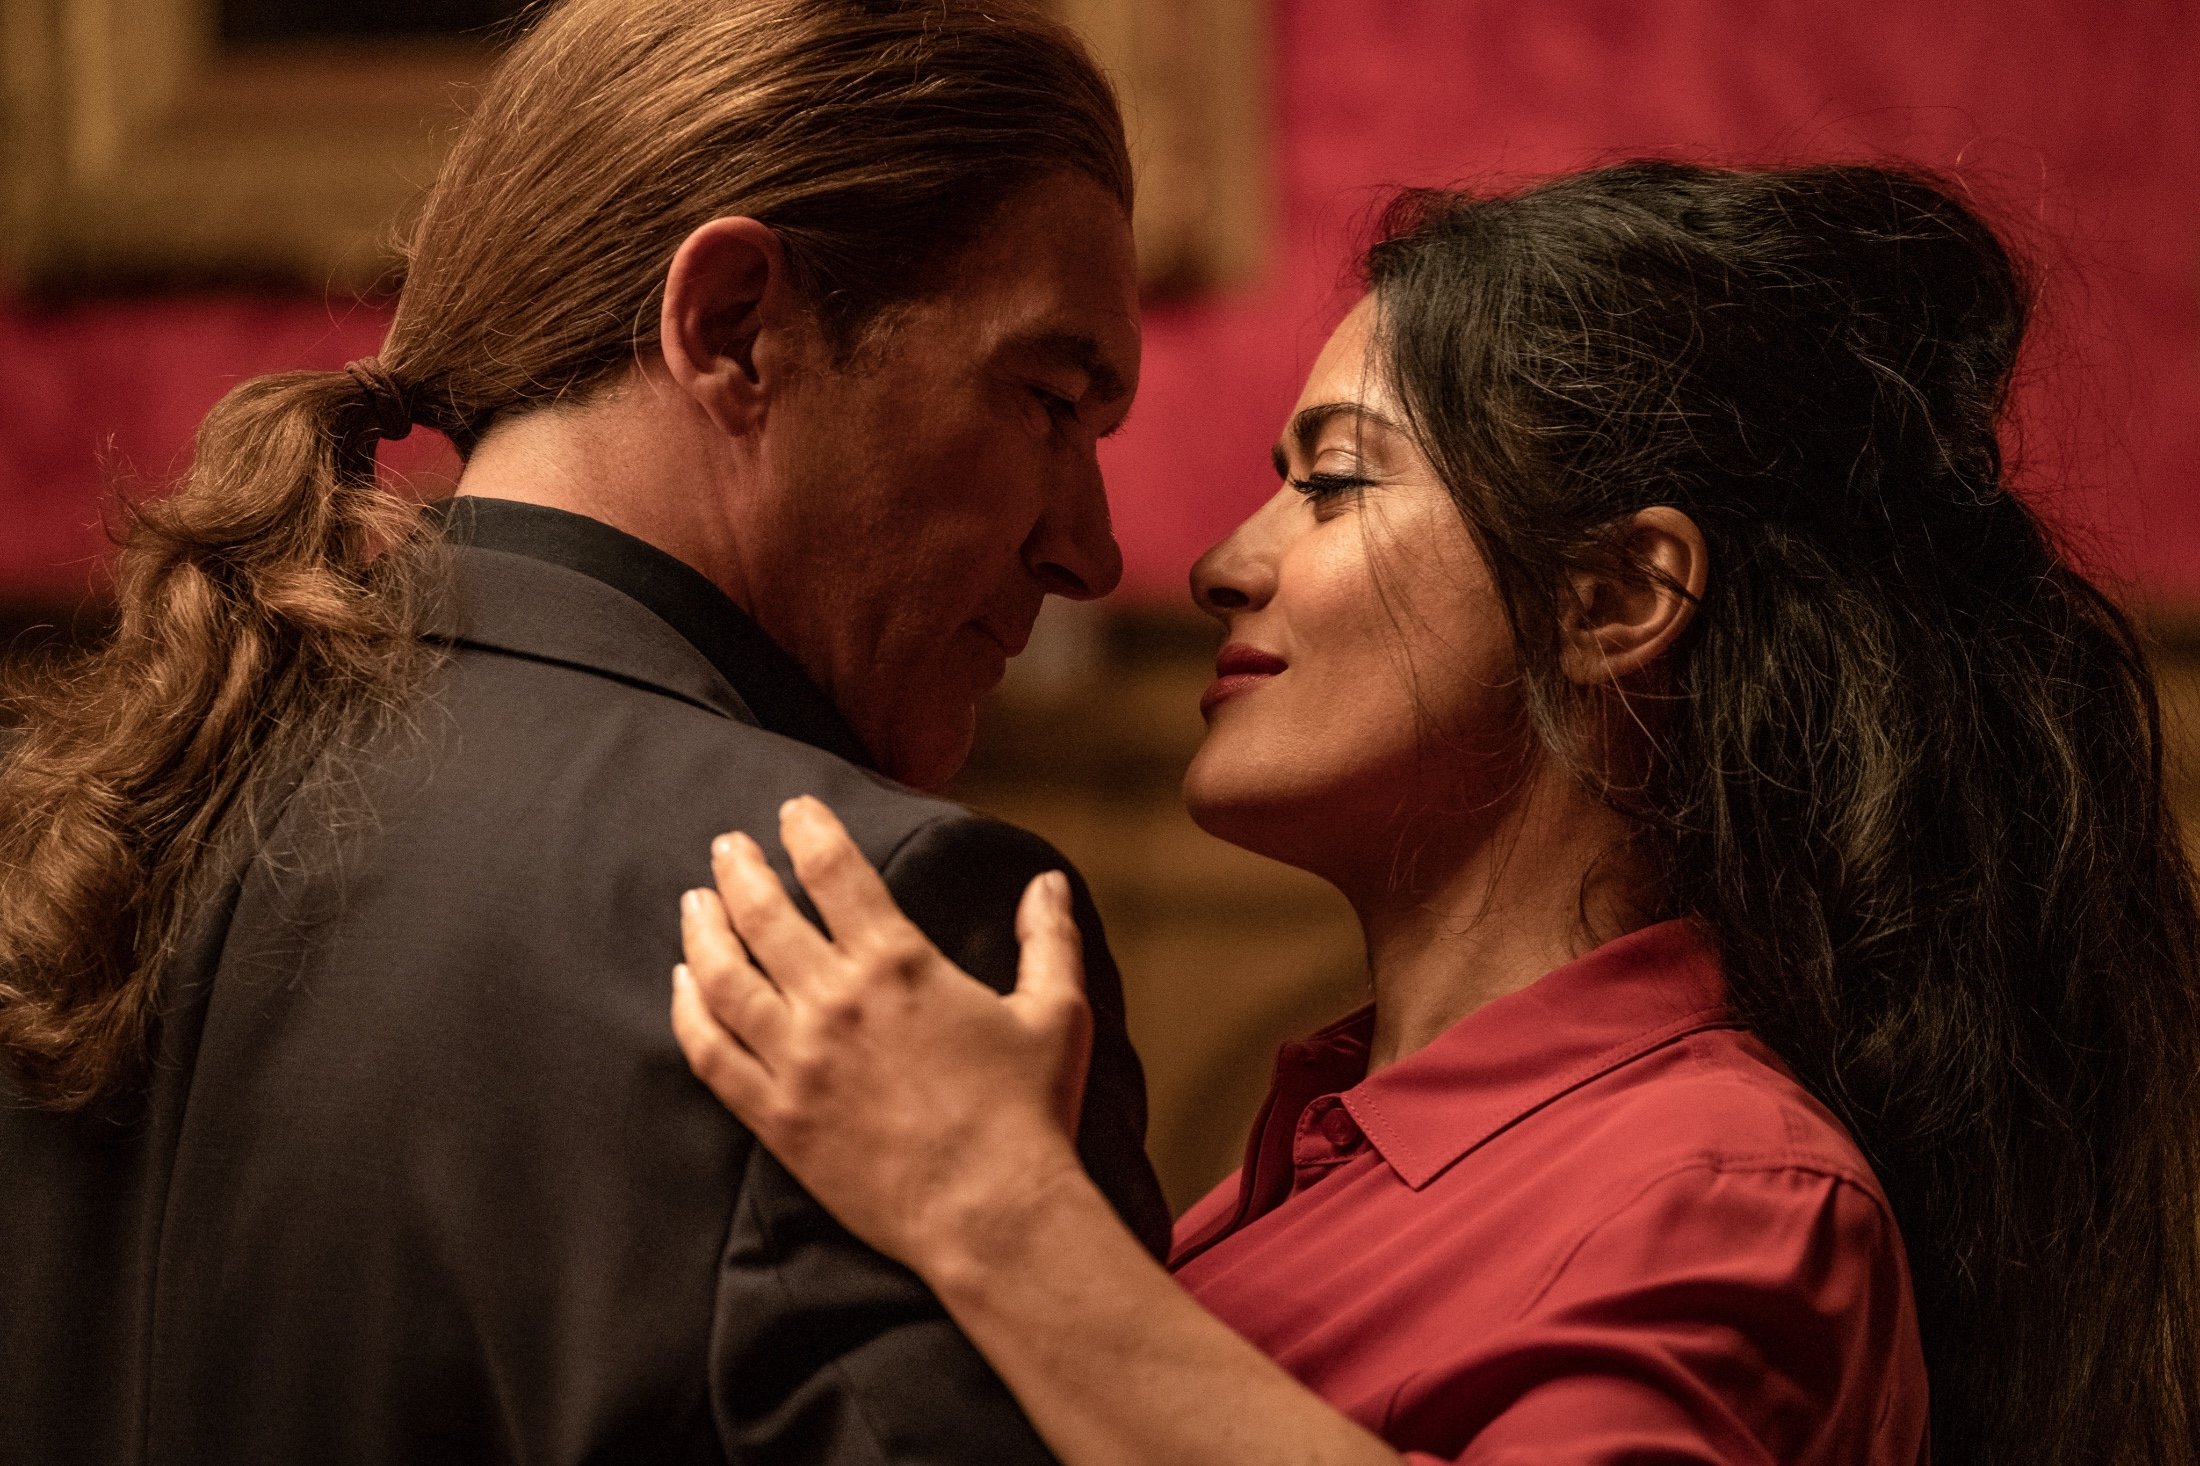 Antonio Banderas (L) and Salma Hayek dance together, in a scene from the movie, "The Hitman